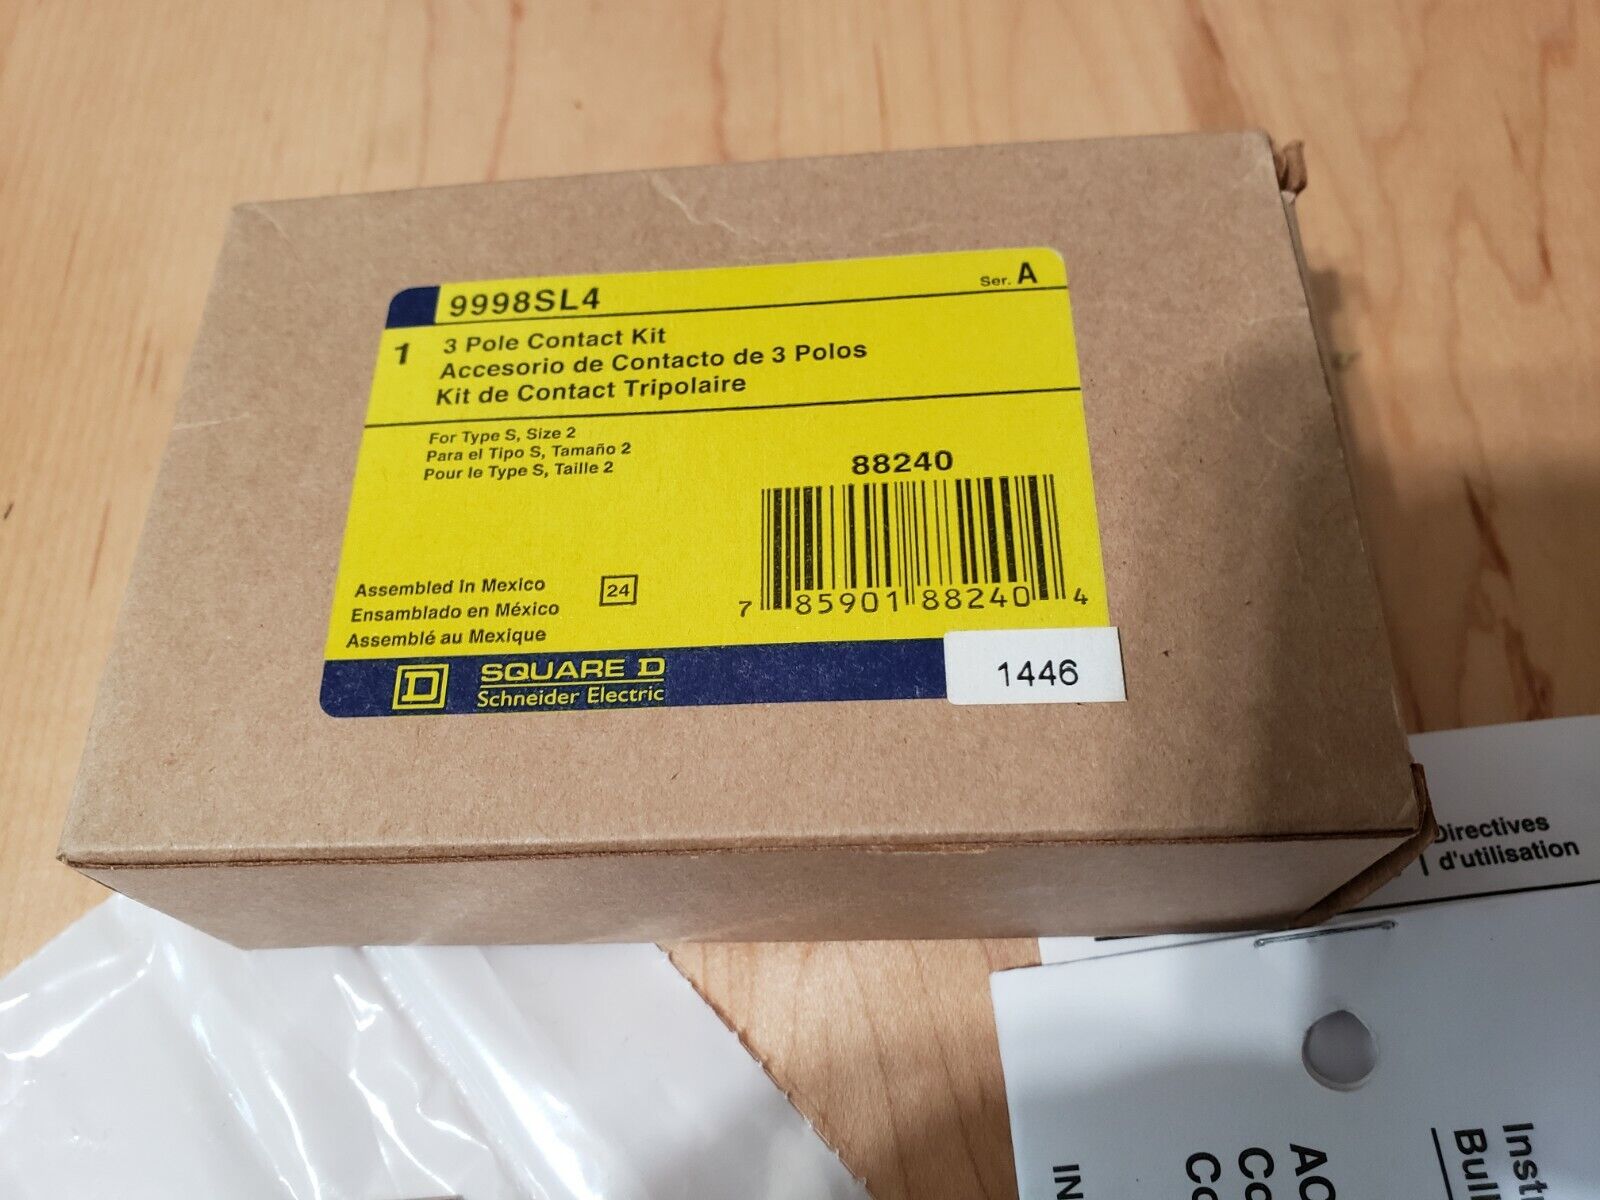  SQUARE D 9998SL4, SIZE 2 CONTACT KIT, 3 POLE, 88240 (New in Box)